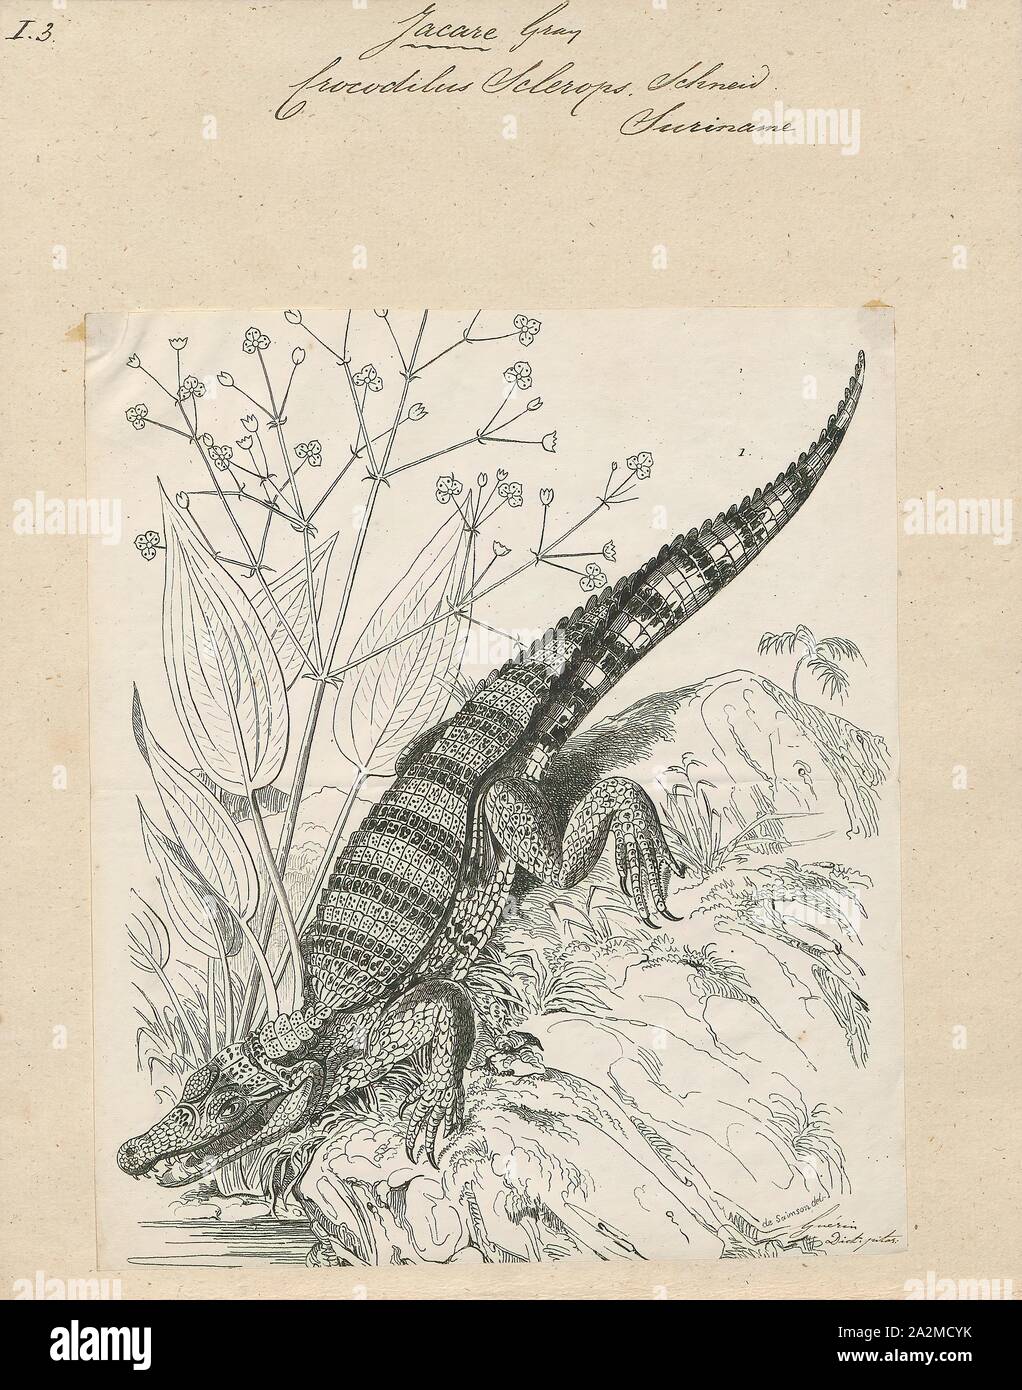 Crocodilus sclerops, Print, The spectacled caiman (Caiman crocodilus), also known as the white caiman, common caiman, and speckled caiman, is a crocodilian in the family Alligatoridae. It is brownish-, greenish-, or yellowish-gray colored and has a spectacle-like ridge between its eyes, which is where its common name come from. It grows to a length of 1.4–2.5 metres (4.6–8.2 ft) and a weight of 7–40 kilograms (15–88 lb), with males being both longer and heavier than females. Its diet varies seasonally, commonly consisting of crabs, fish, mammals, and snails. Breeding occurs from May to August Stock Photo